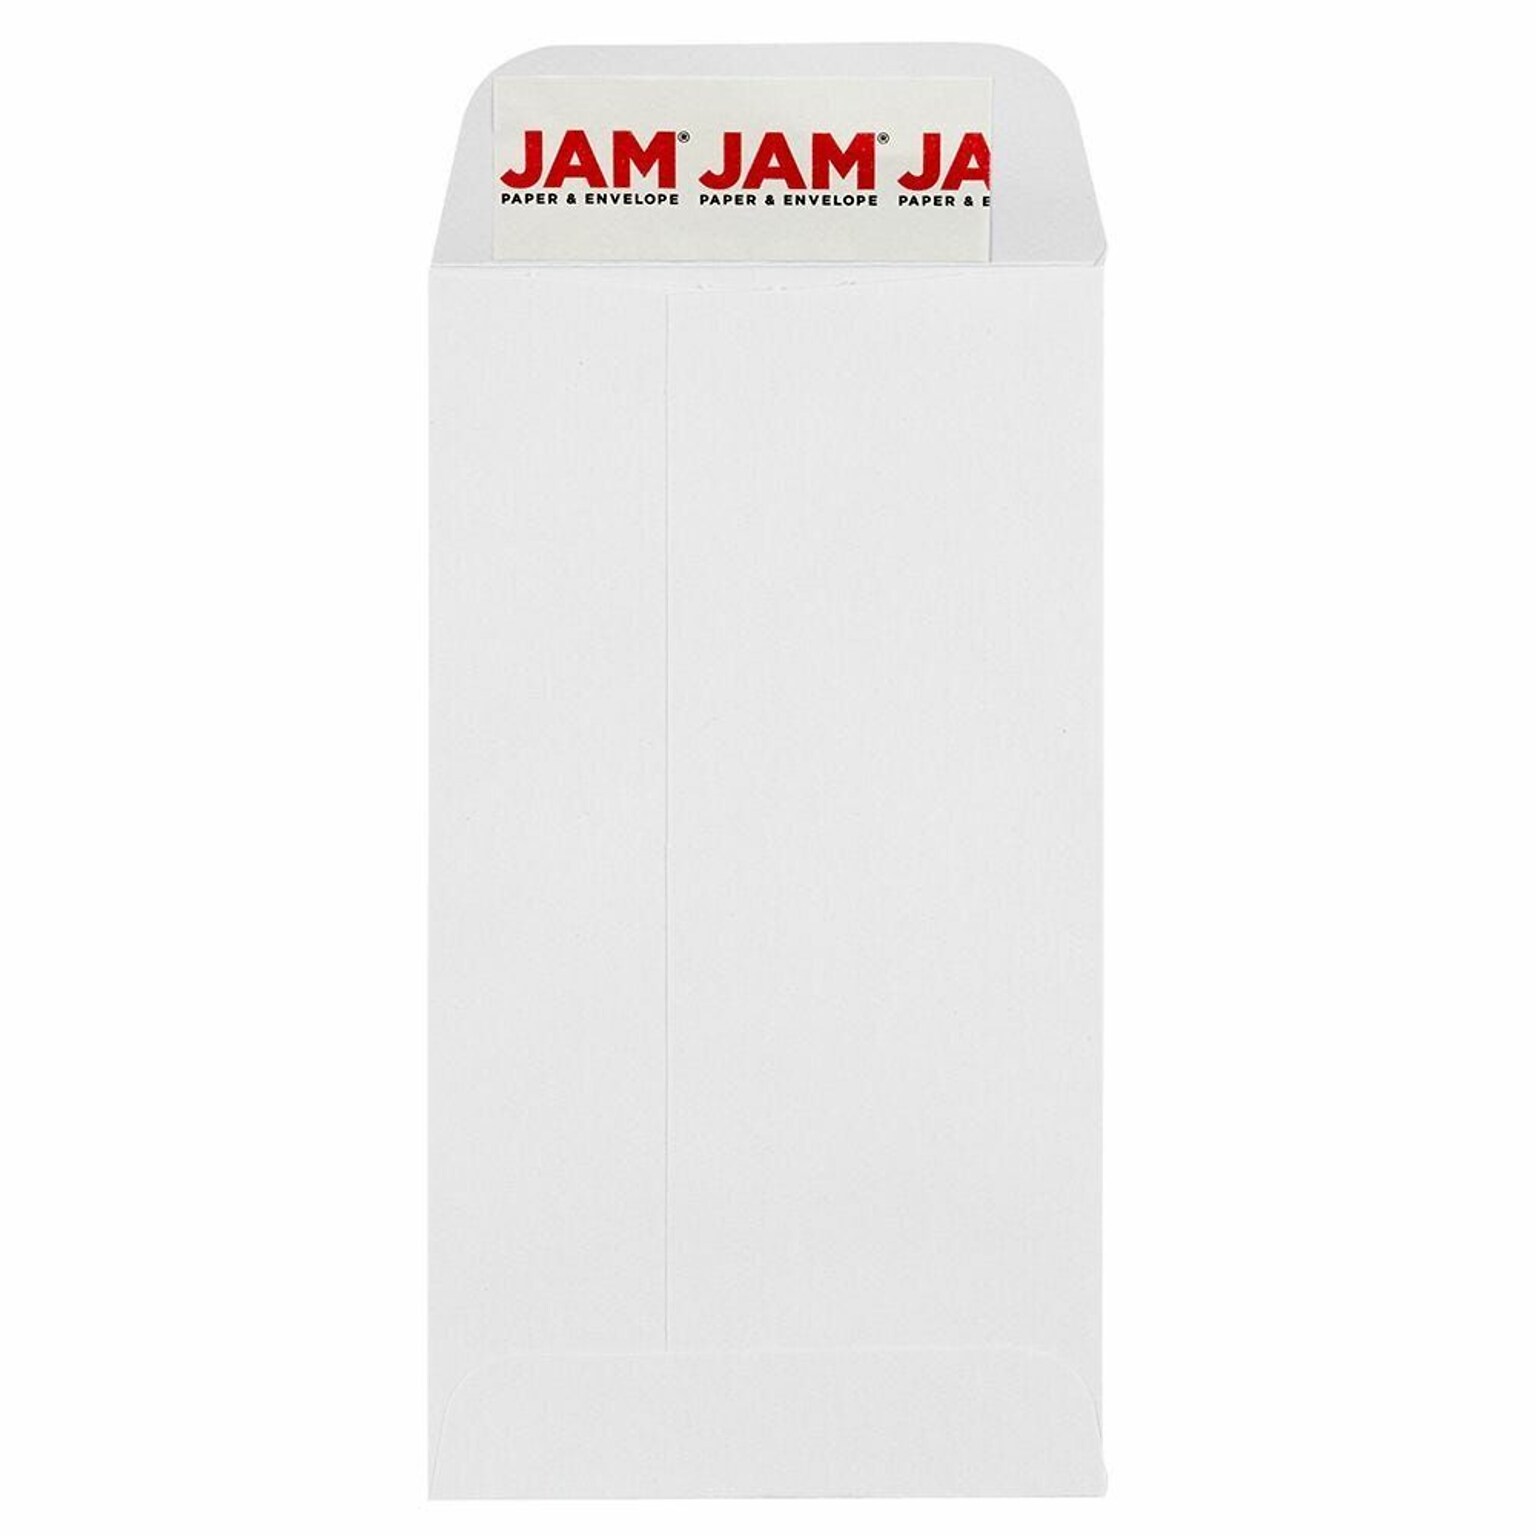 JAM PAPER Self Seal #5 Coin Business Envelopes, 2 7/8 x 5 1/4, White, 100/Pack (356838555D)